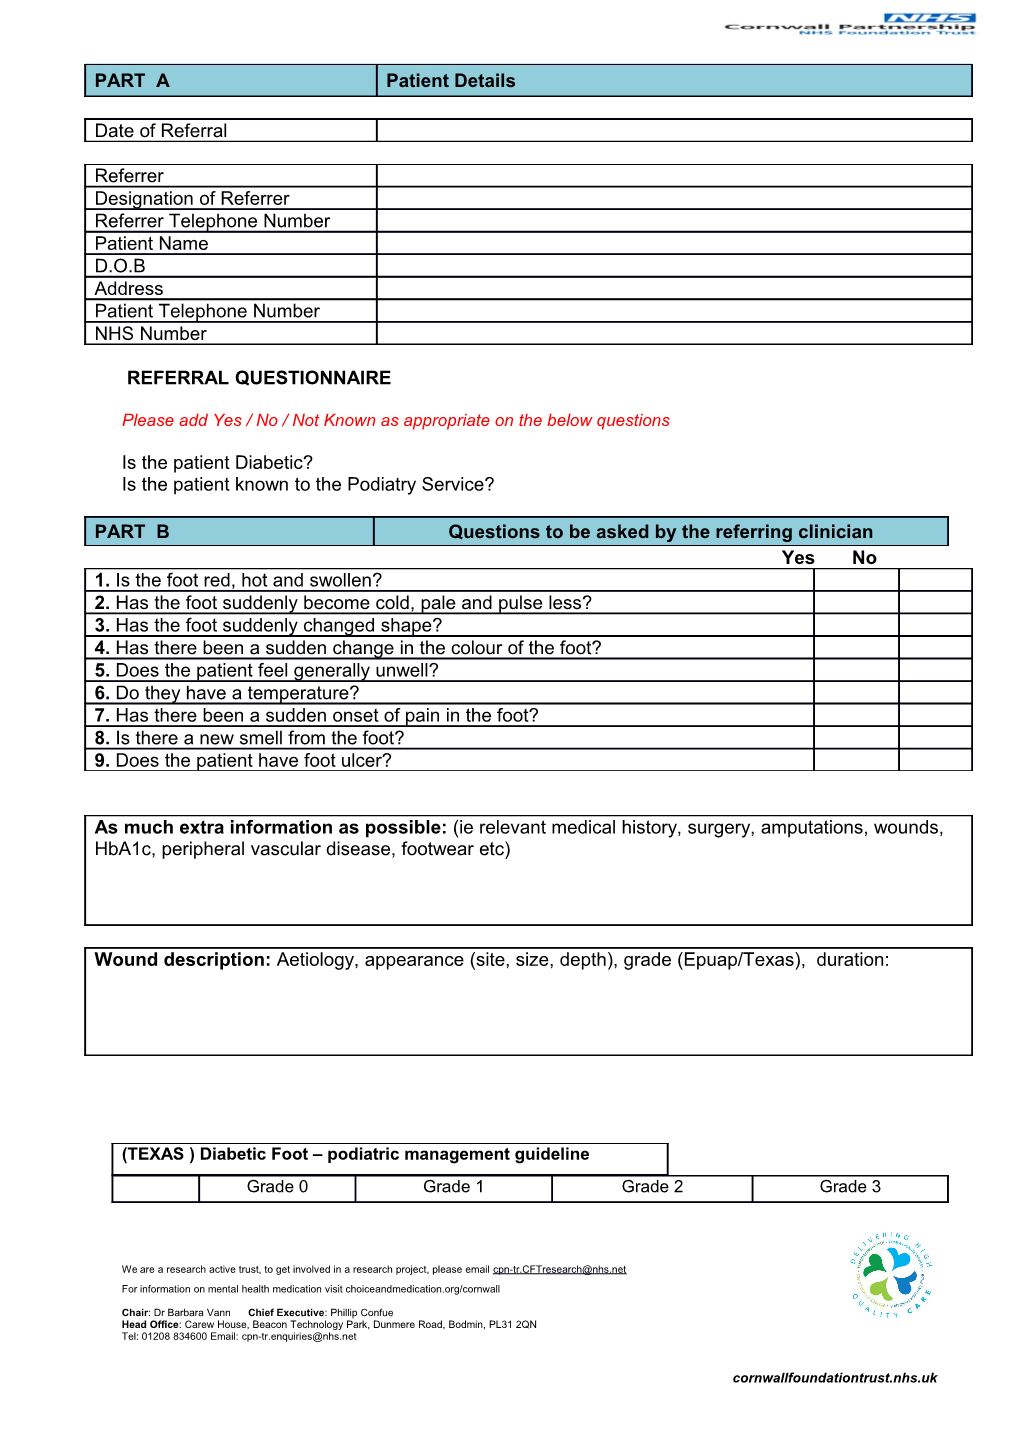 Referral Questionnaire